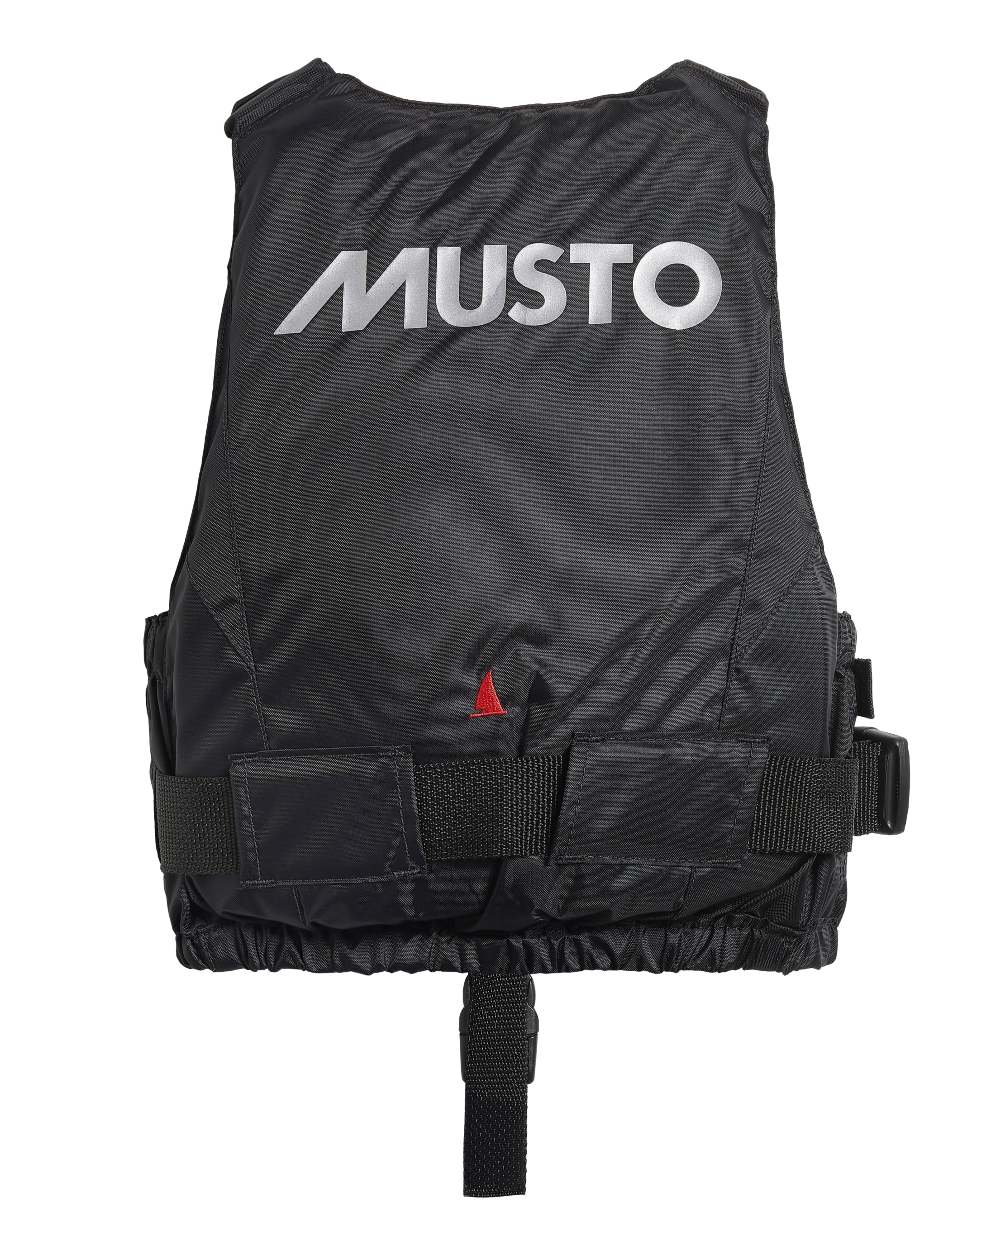 Black Coloured Musto Junior Champ Buoyancy Aid On A White Background 